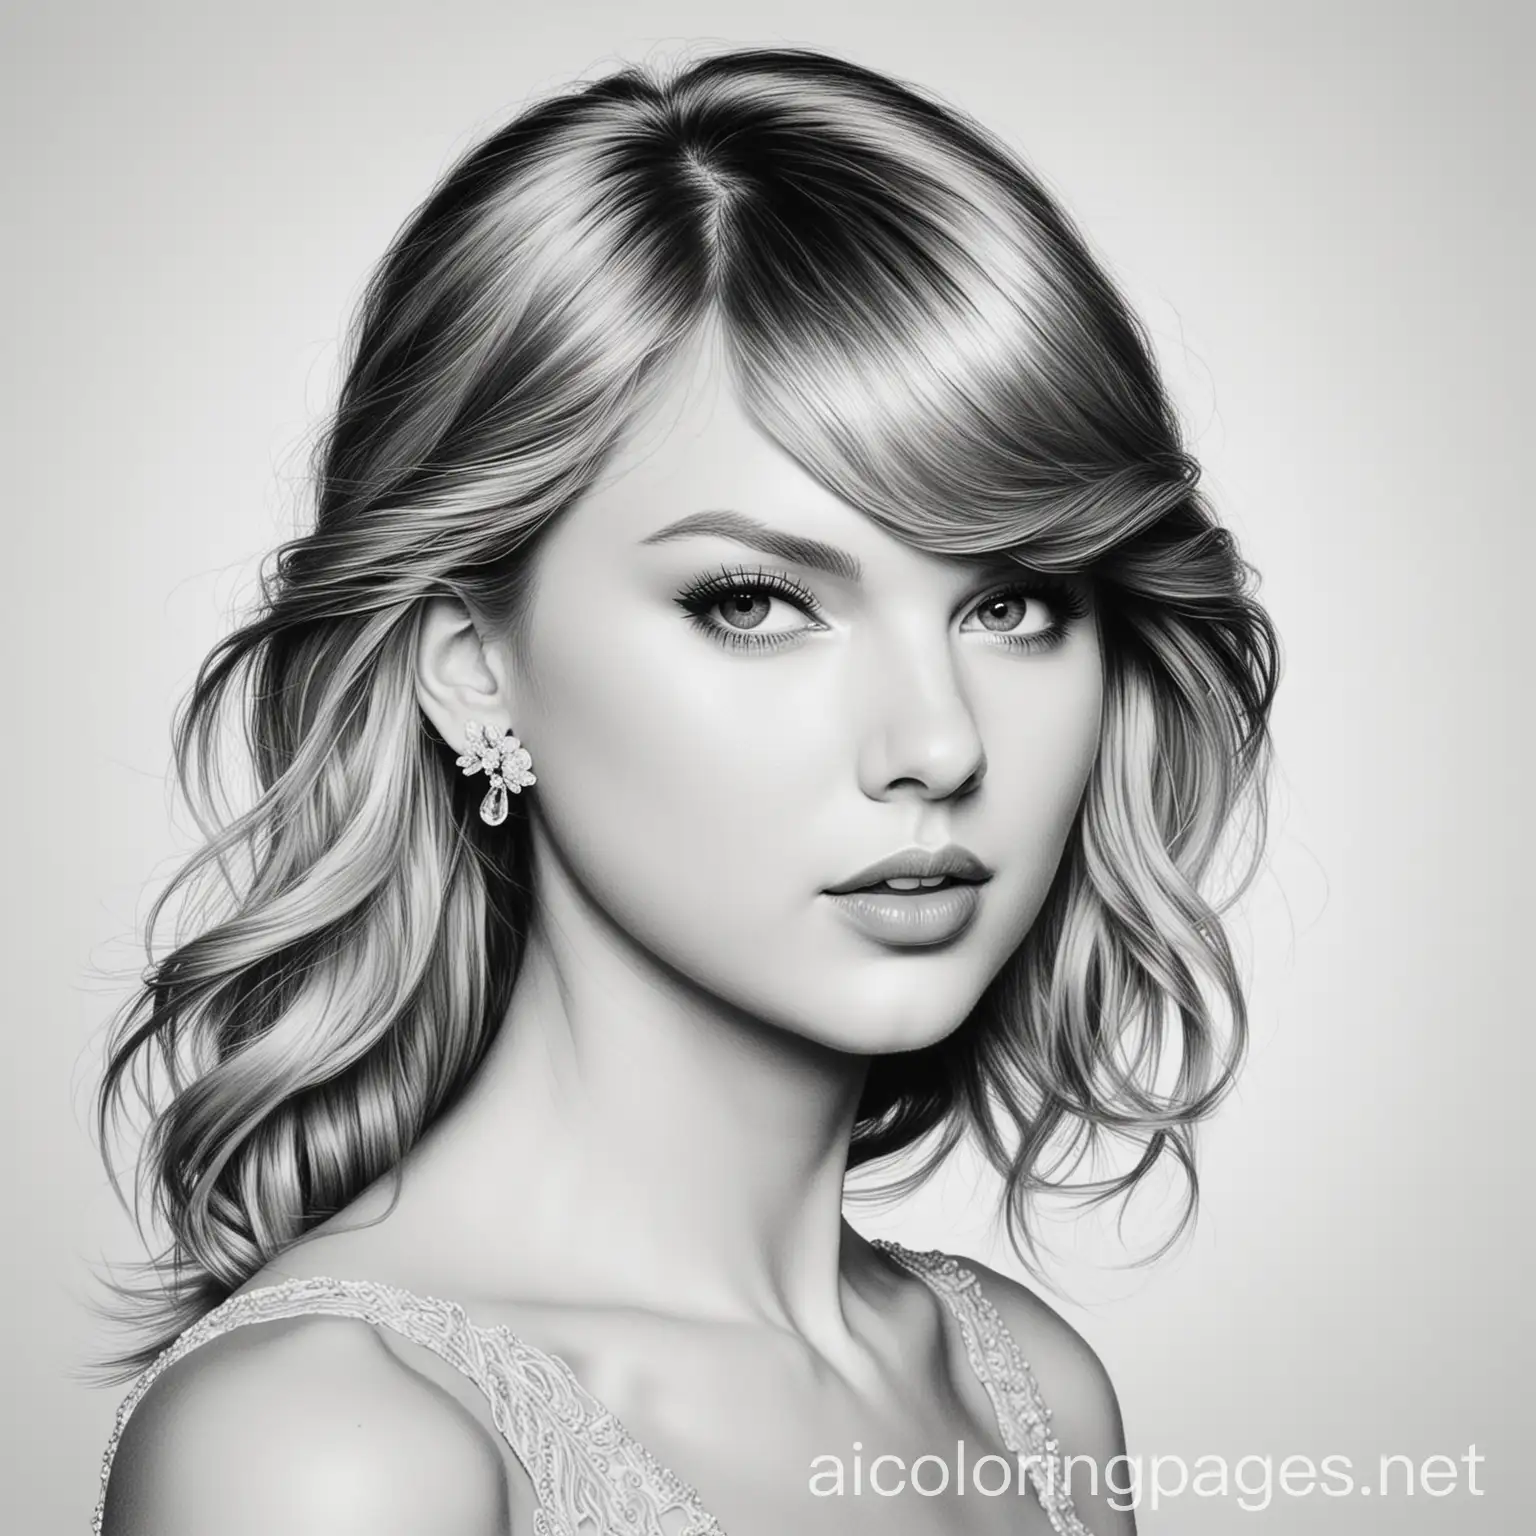 taylor swift, Coloring Page, black and white, line art, white background, Simplicity, Ample White Space. The background of the coloring page is plain white to make it easy for young children to color within the lines. The outlines of all the subjects are easy to distinguish, making it simple for kids to color without too much difficulty